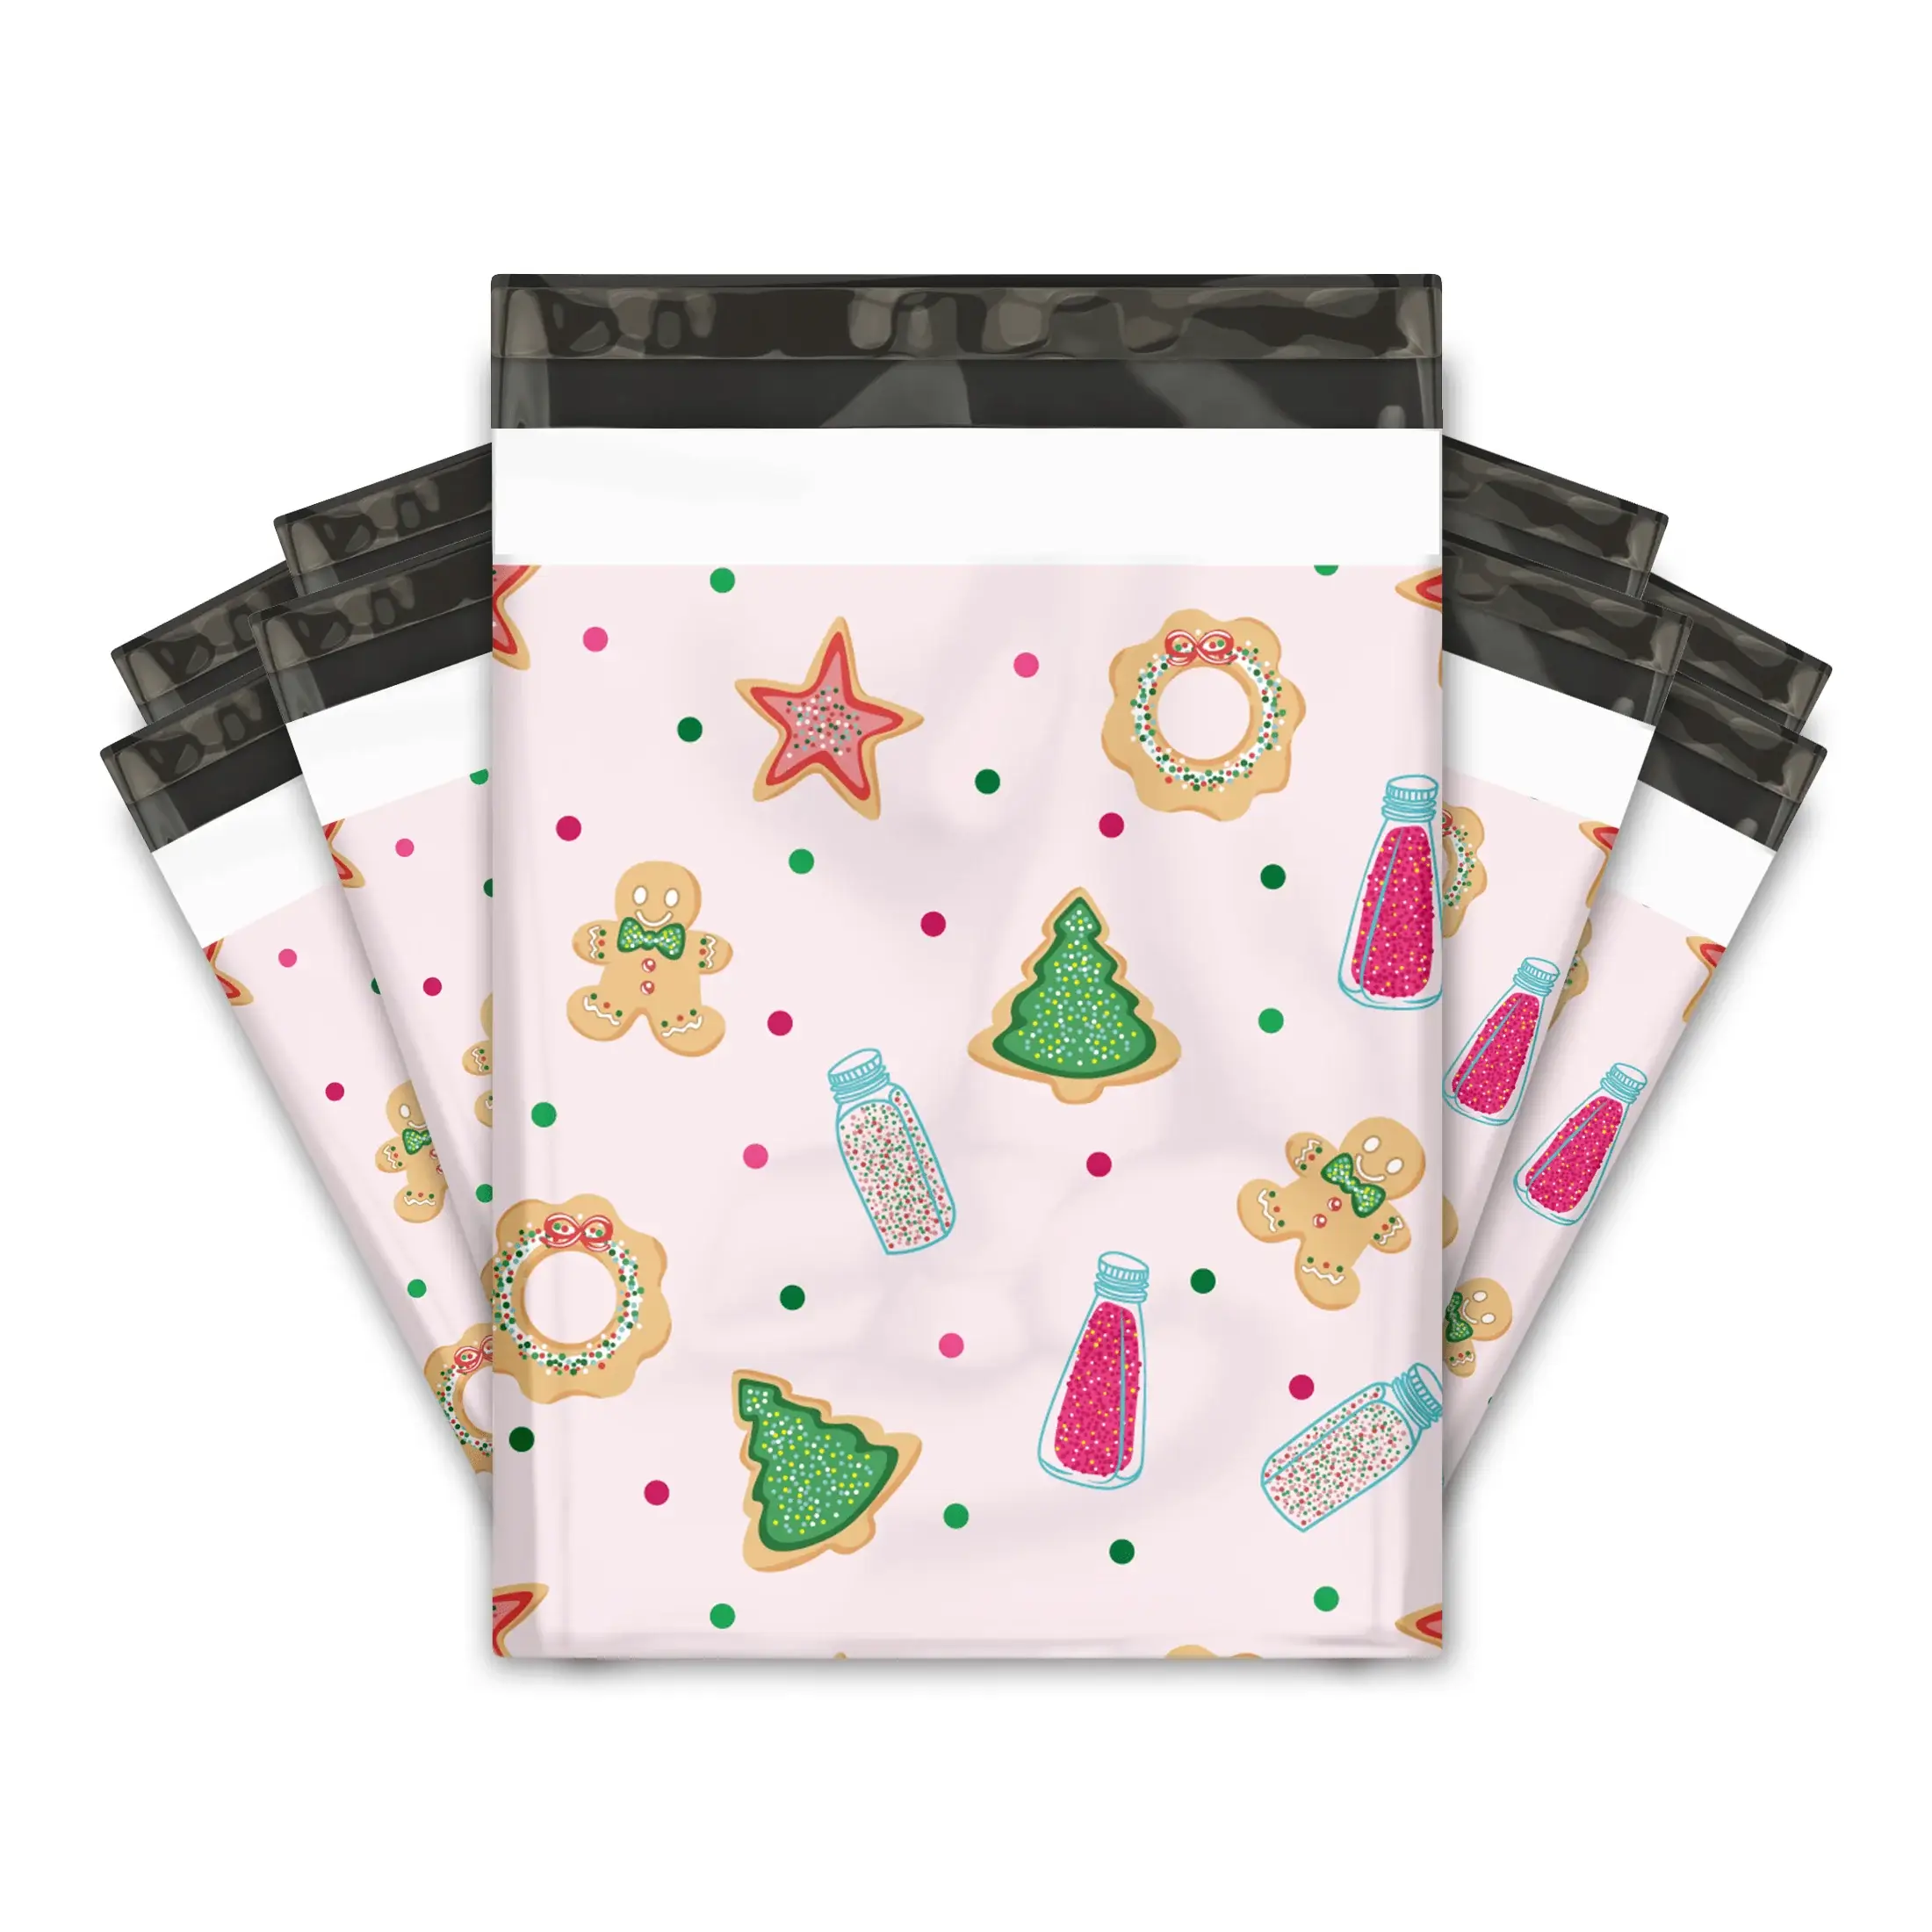 Hallmark Christmas Gift Tags with Ribbon, Sticker Seals, and Mini Notecards  (Elegant Plaid, Snowflakes, Cardinals) for Gift Bags and Wrapped Presents